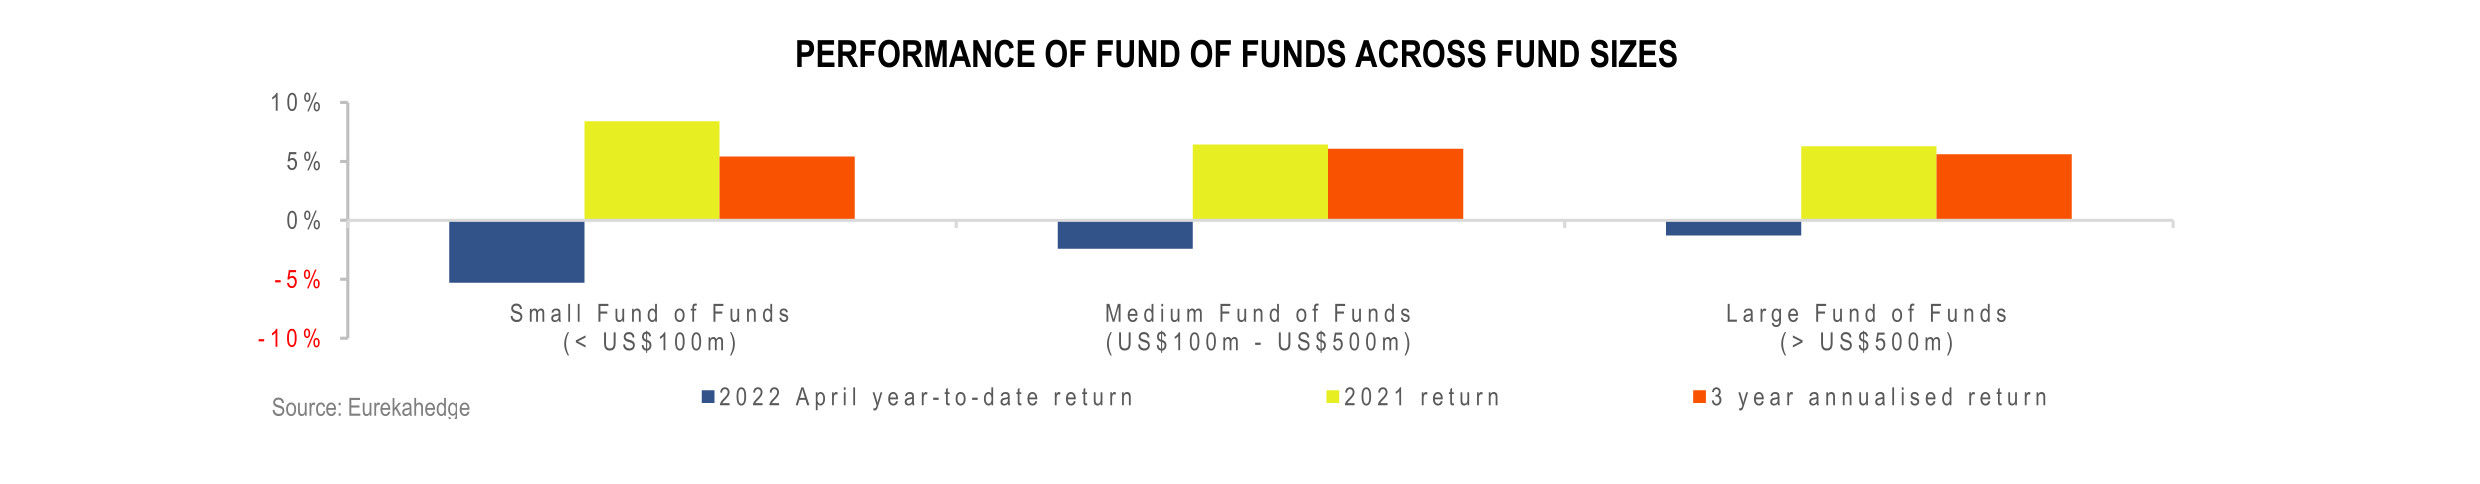 Fund of Hedge Funds Infographic June 2022 - Performance